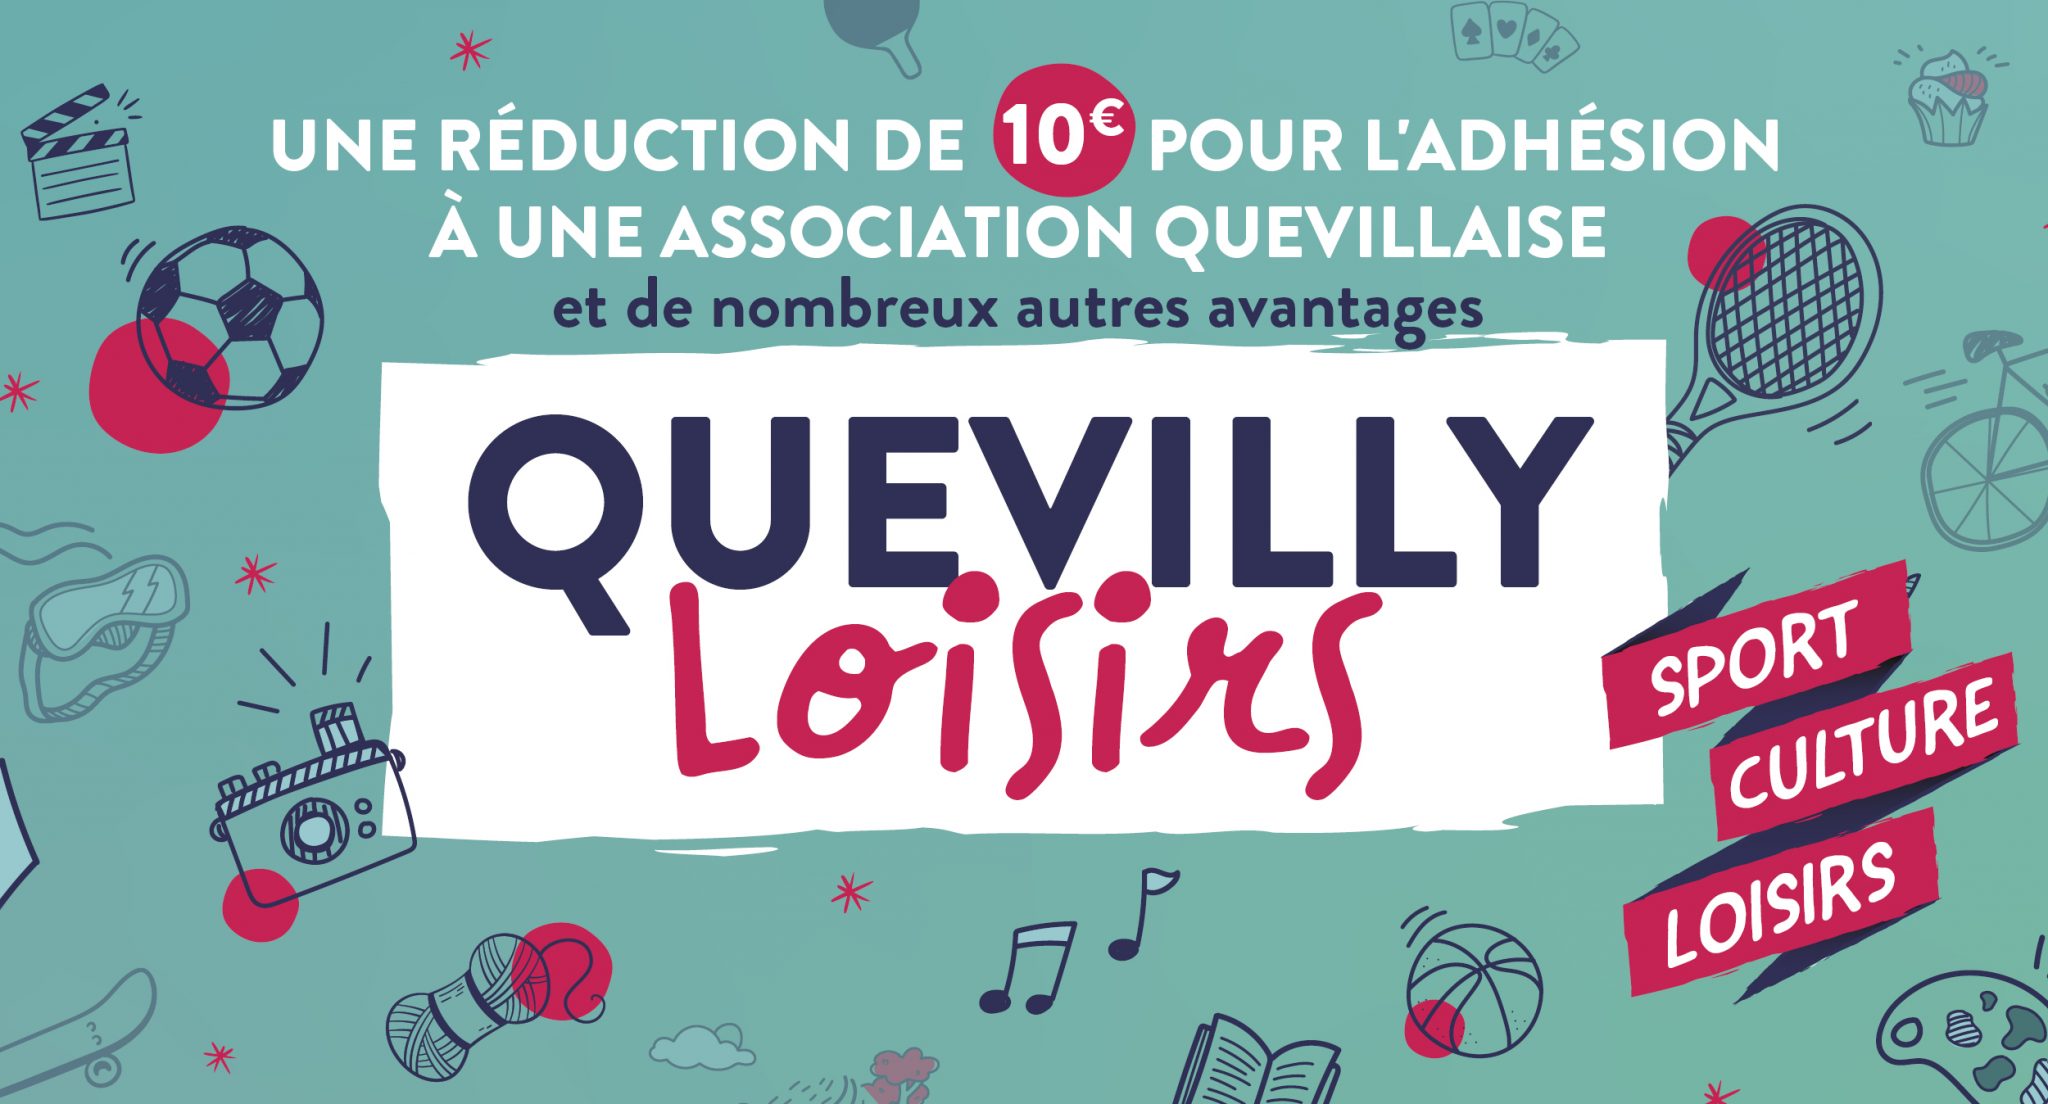 Quevilly Loisirs